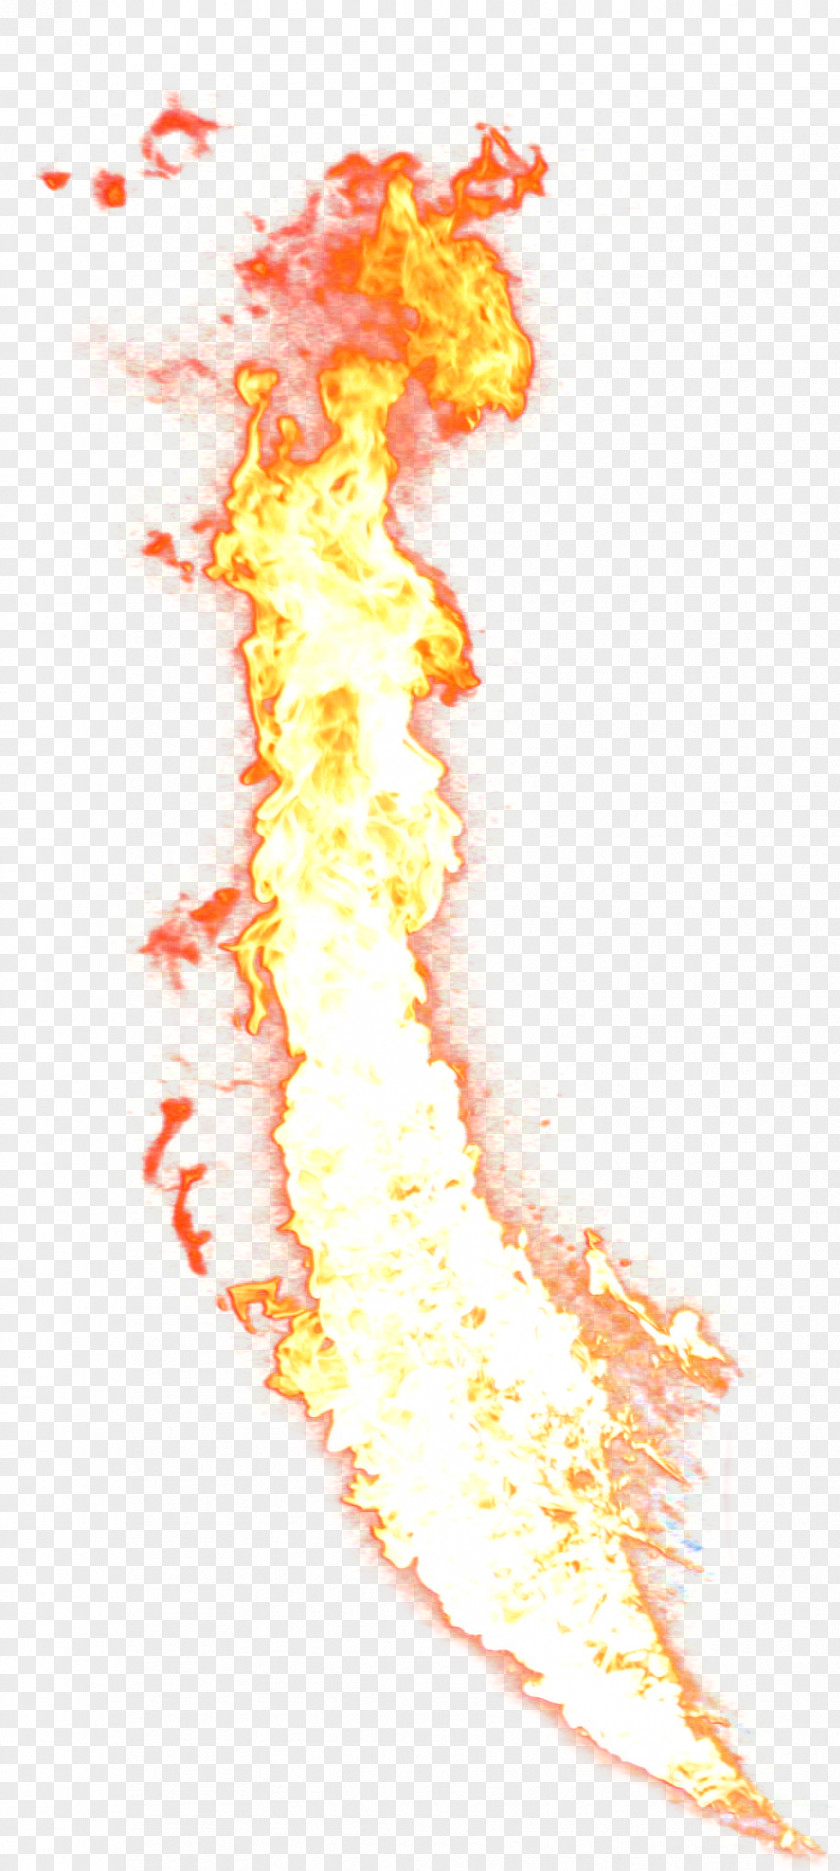 Flame Combustion Fire Euclidean Vector PNG